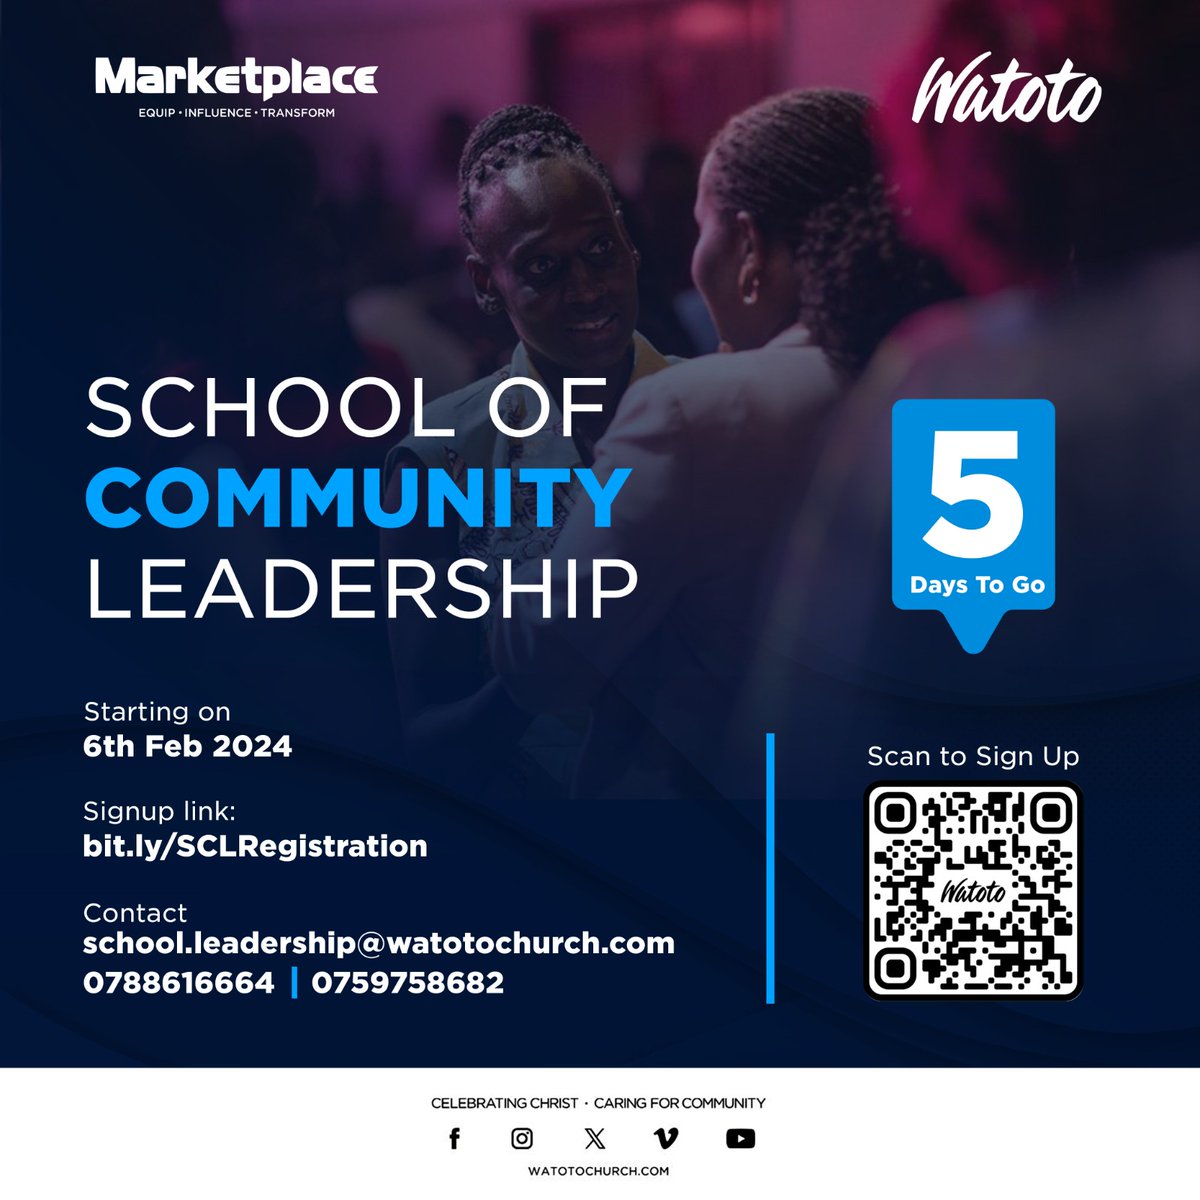 5 Days until the School of Community Leadership  2024 launches. Secure your spot now and prepare for an empowering journey!

Register: bit.ly/SCLRegistration

 #LeadershipExperience #SkillsDevelopment #MakeAnImpact #CorporateLeadership #ElevateYourSkills #WatotoSCL2024